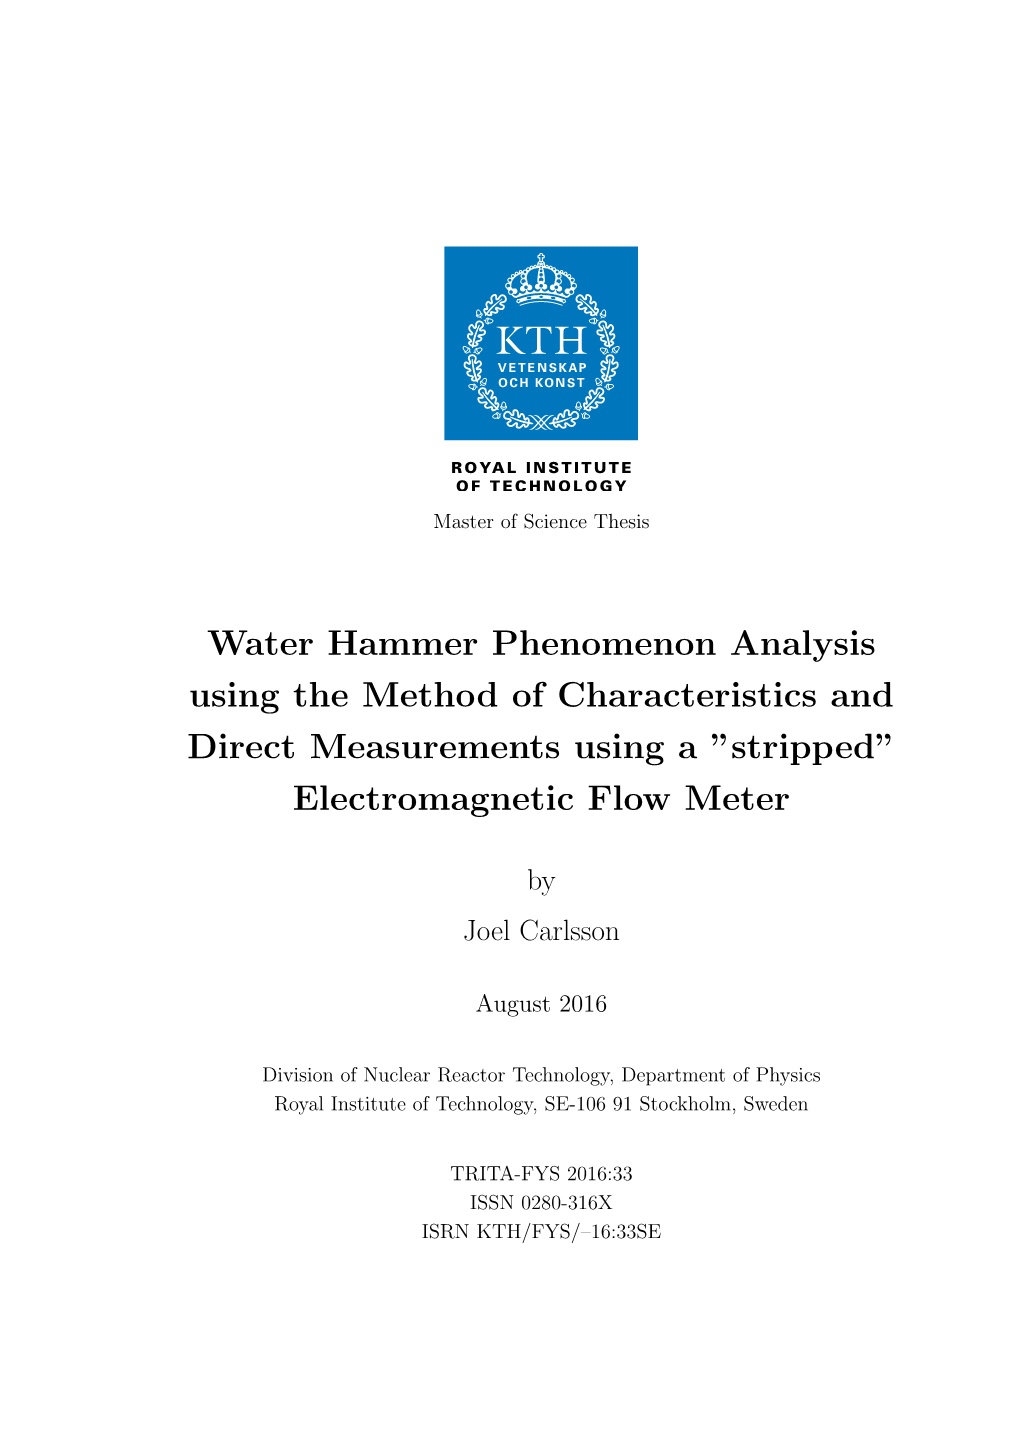 Water Hammer Phenomenon Analysis Using the Method of Characteristics and Direct Measurements Using a ”Stripped” Electromagnetic Flow Meter